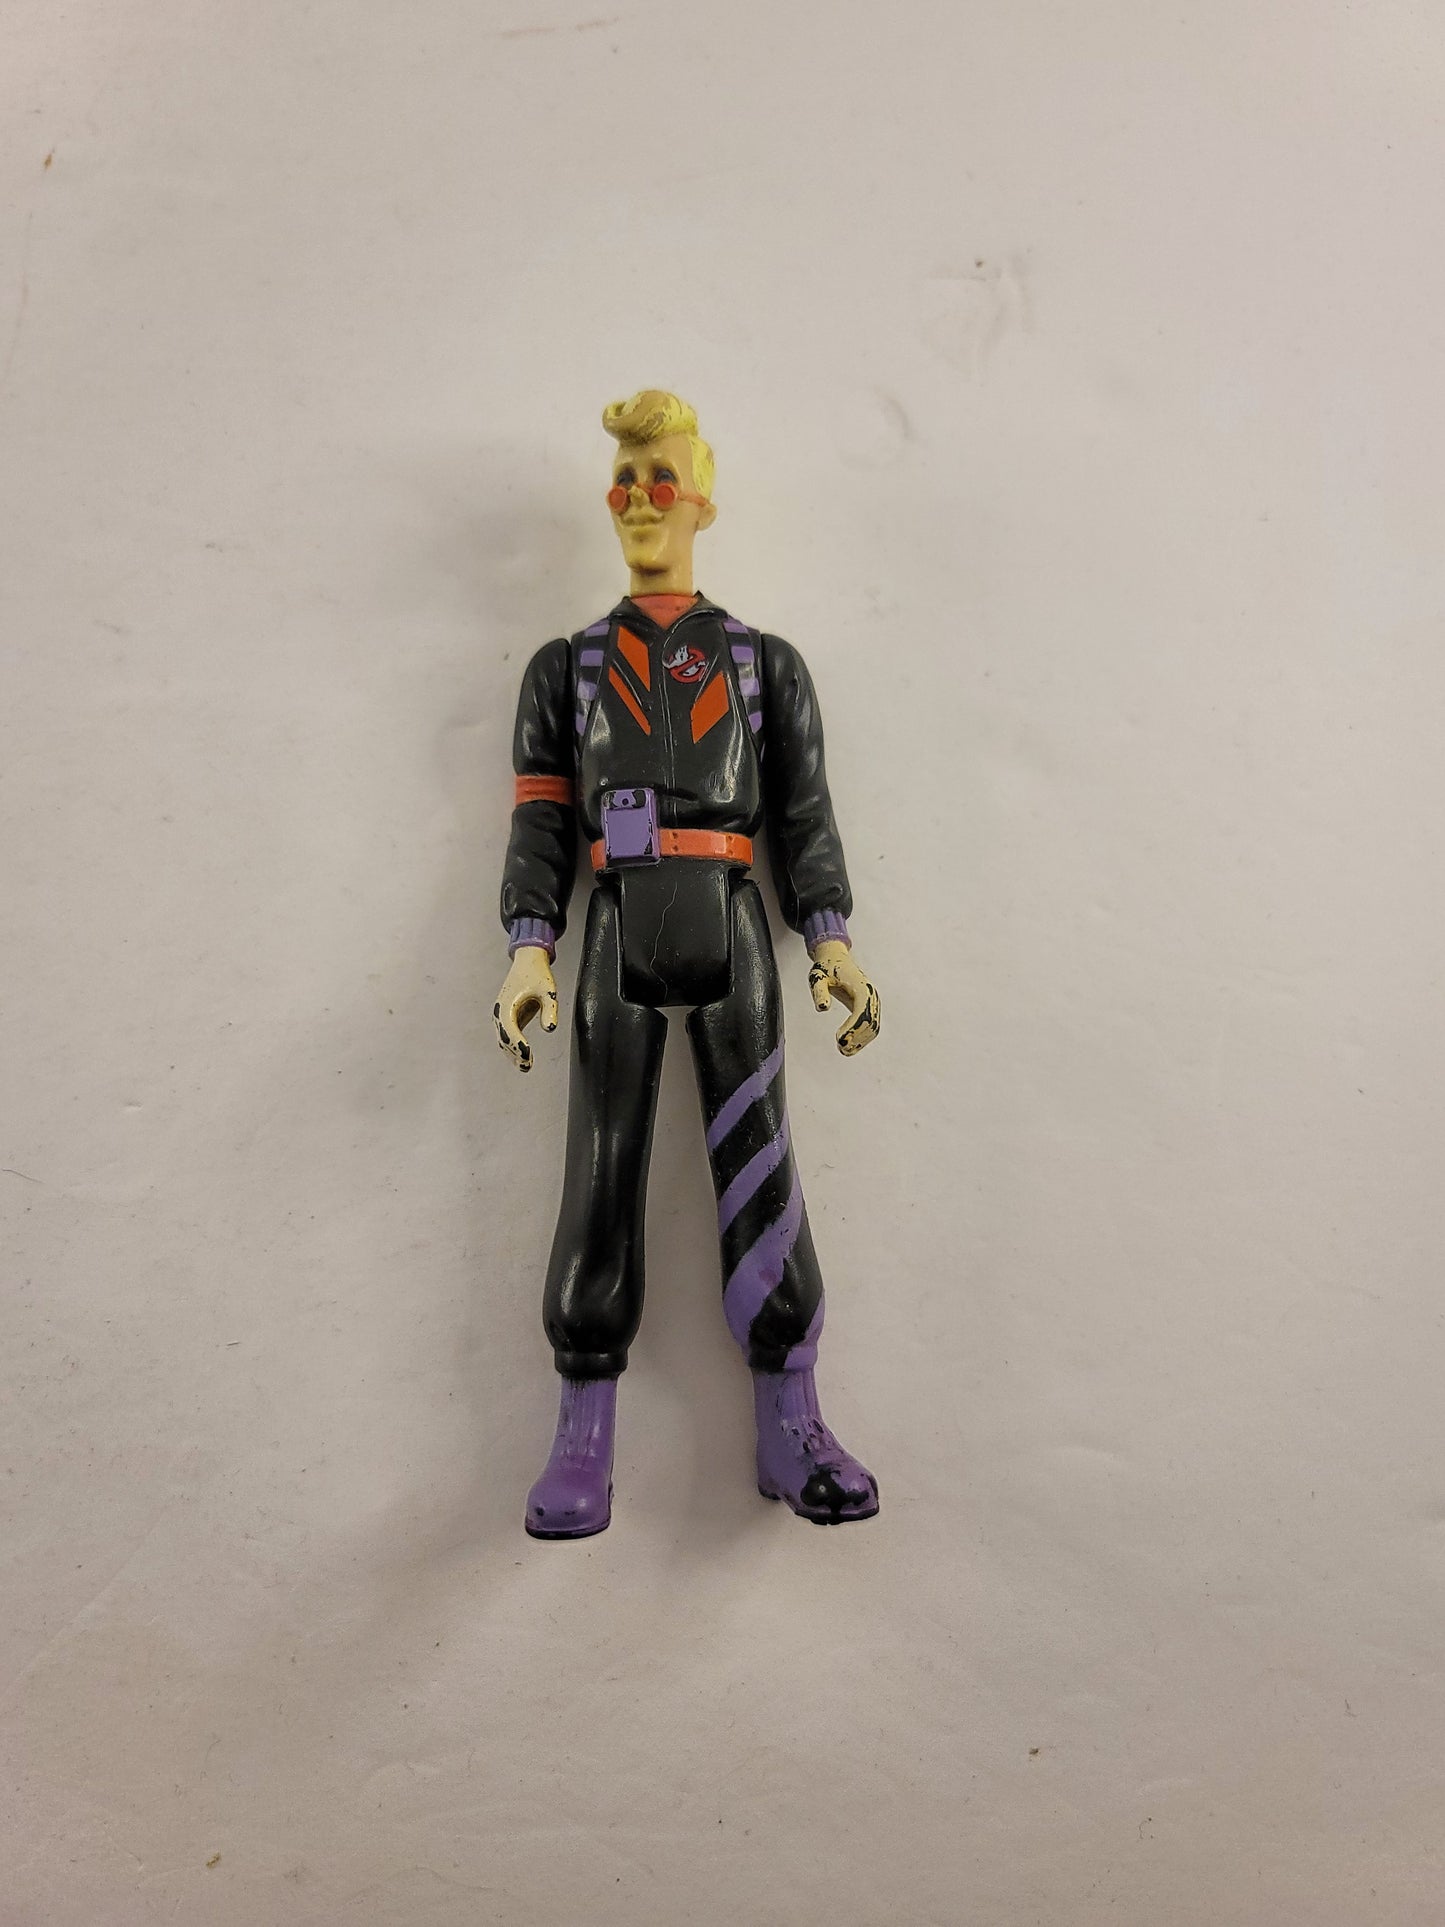 The Real Ghostbusters Vintage Lot Of 10 Action Figures